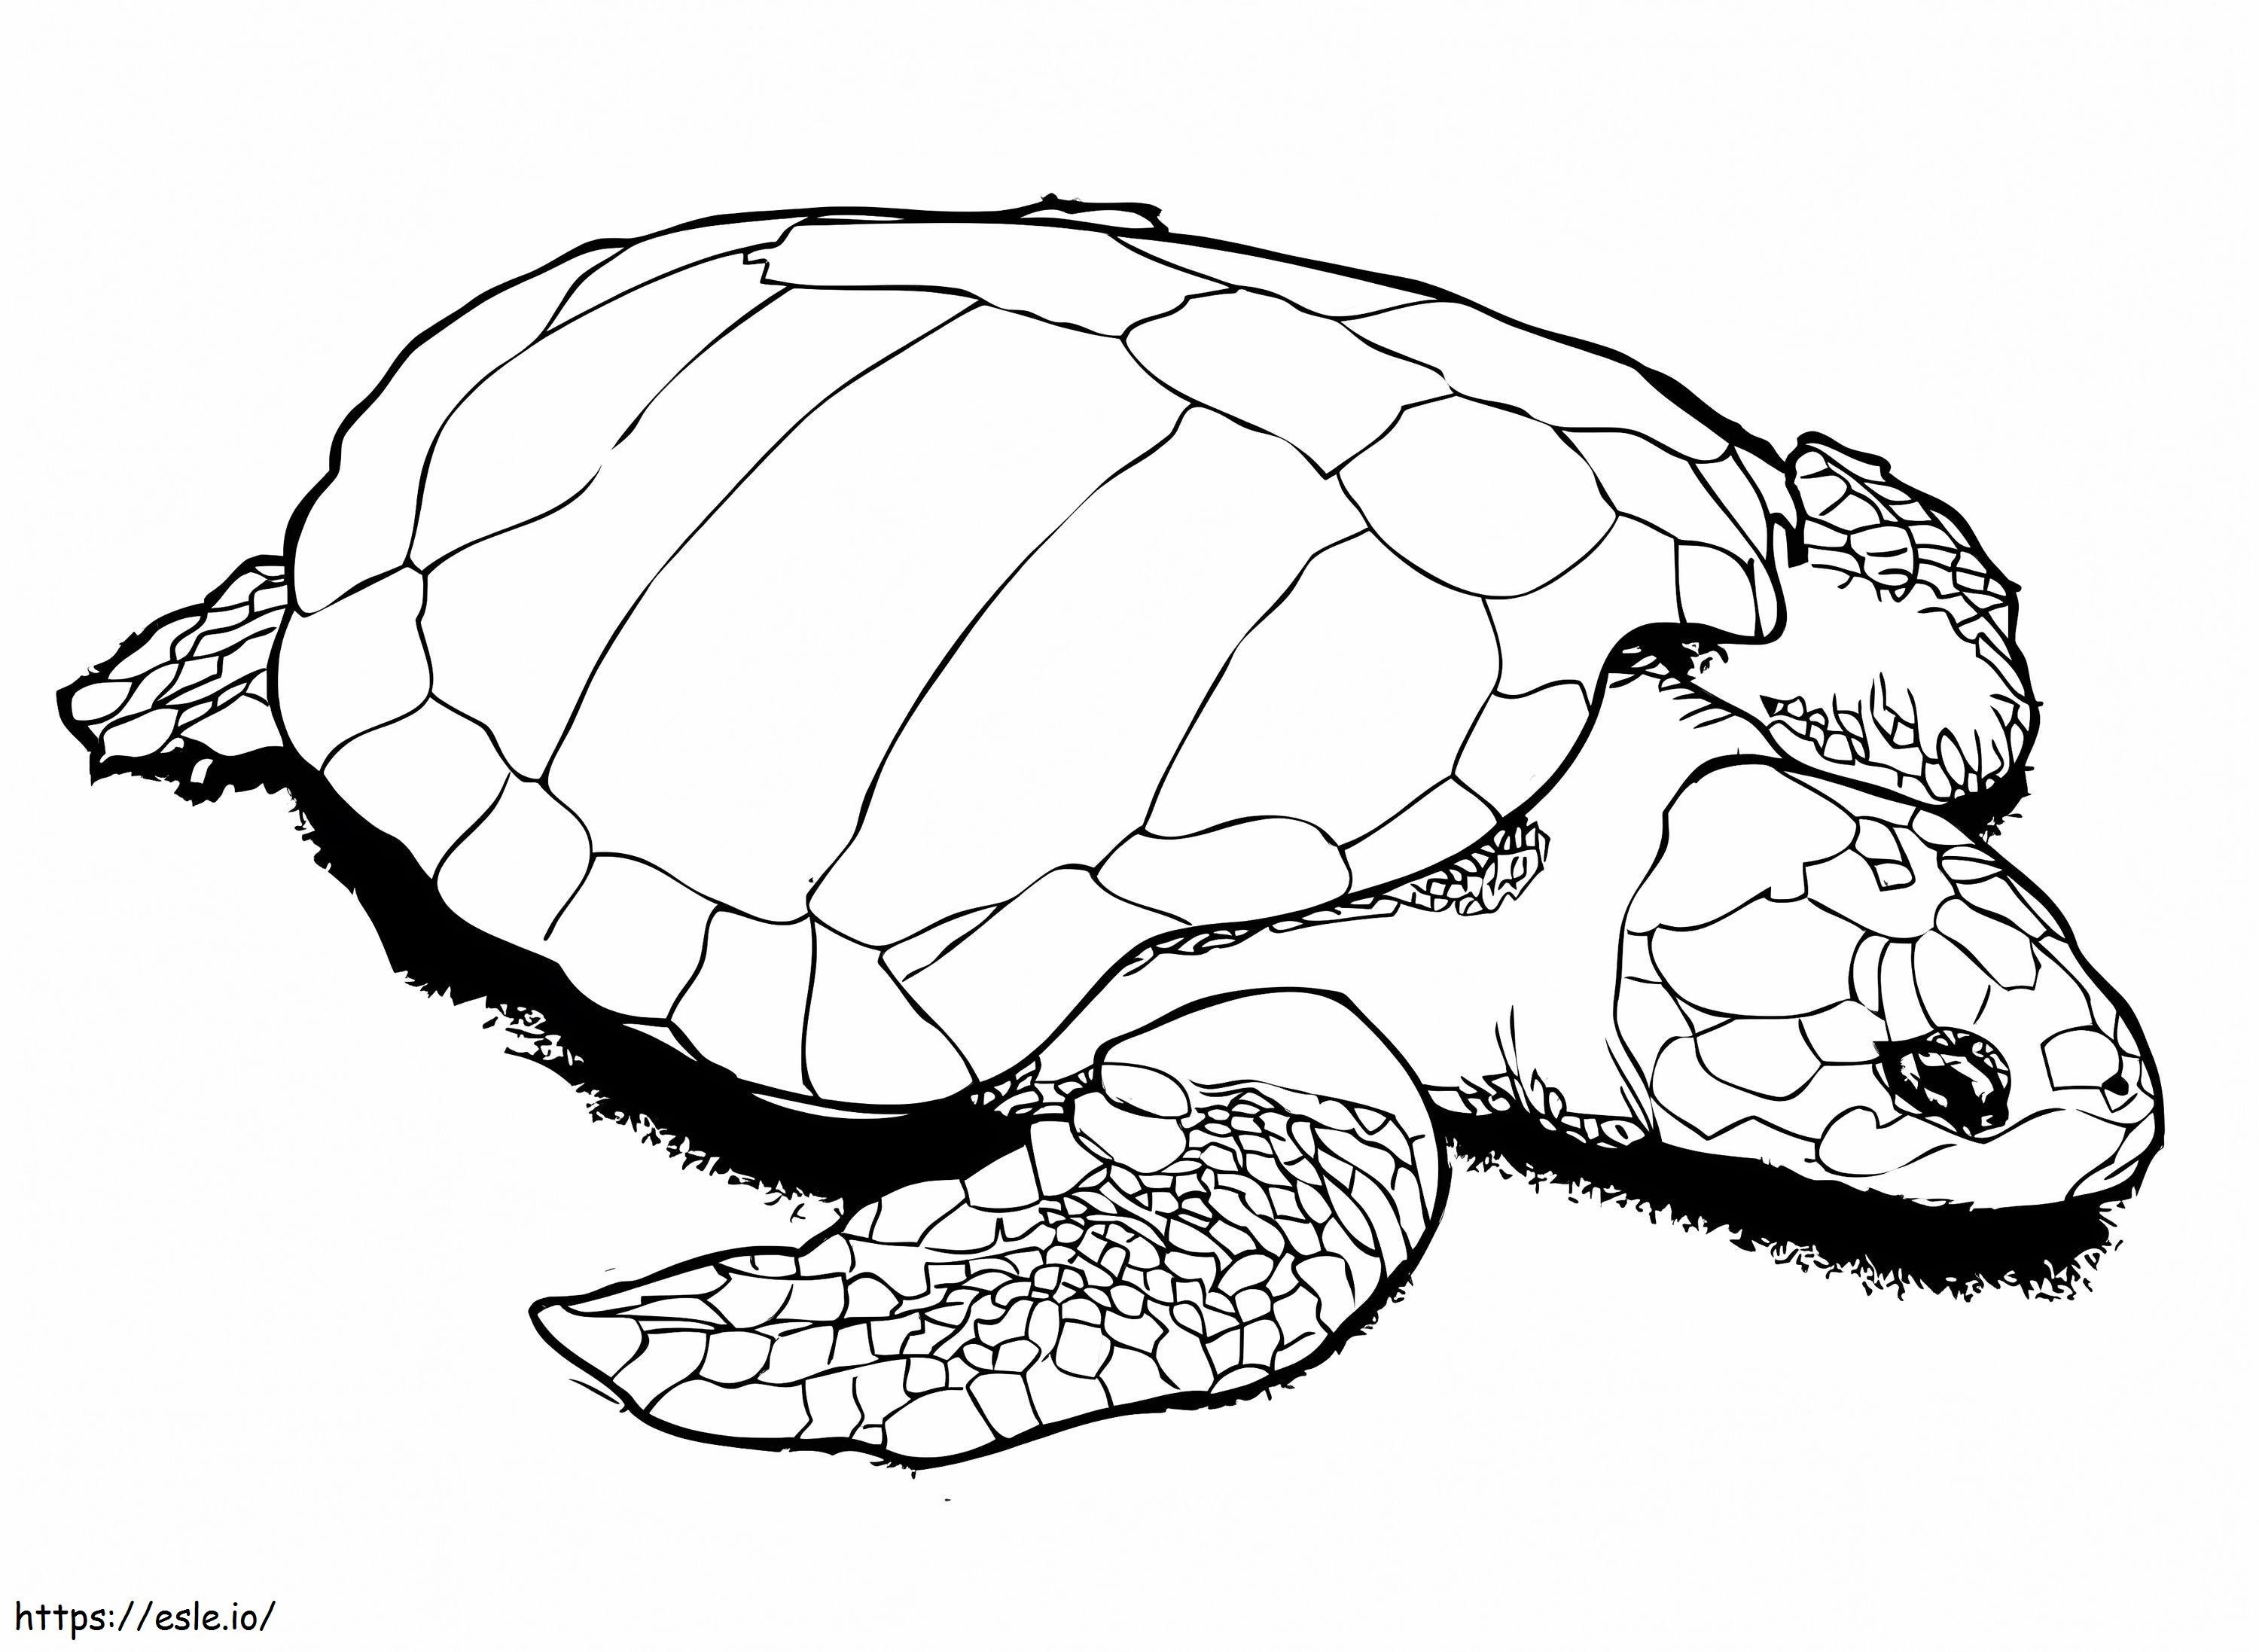 Basic Turtle coloring page